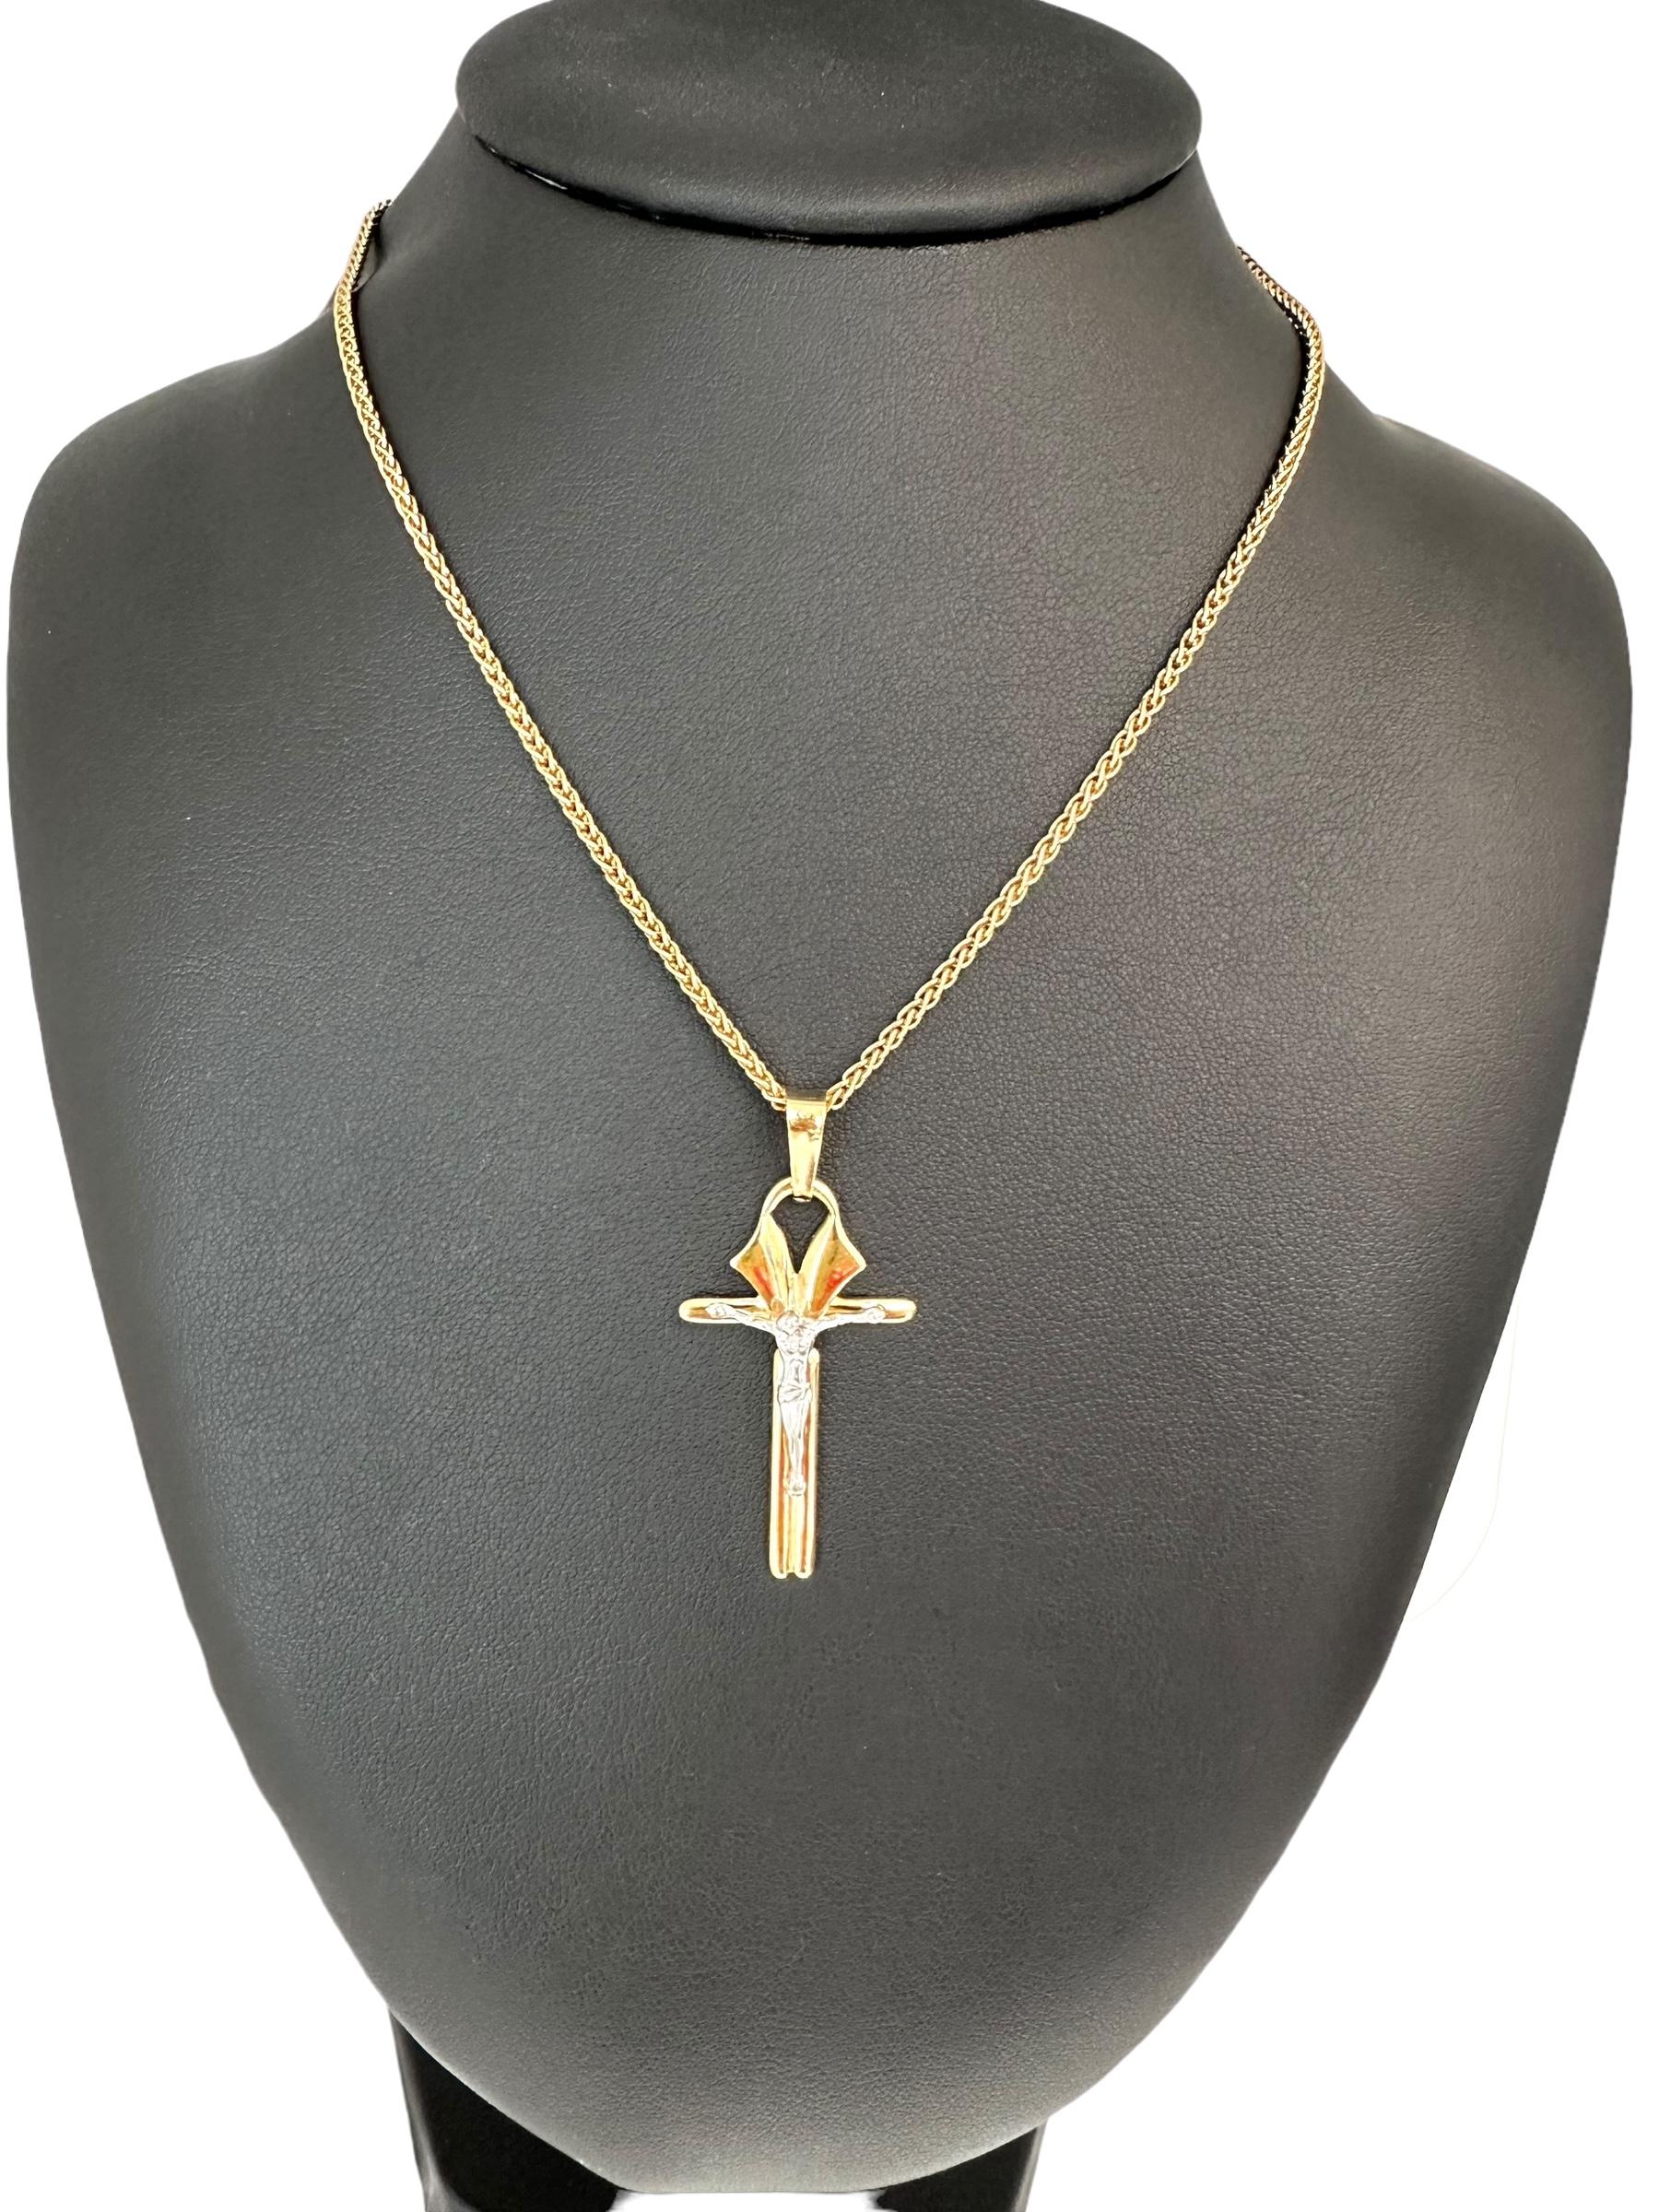 Italian Modern Crucifix Yellow and White Gold Stylized Coptic Style For Sale 2